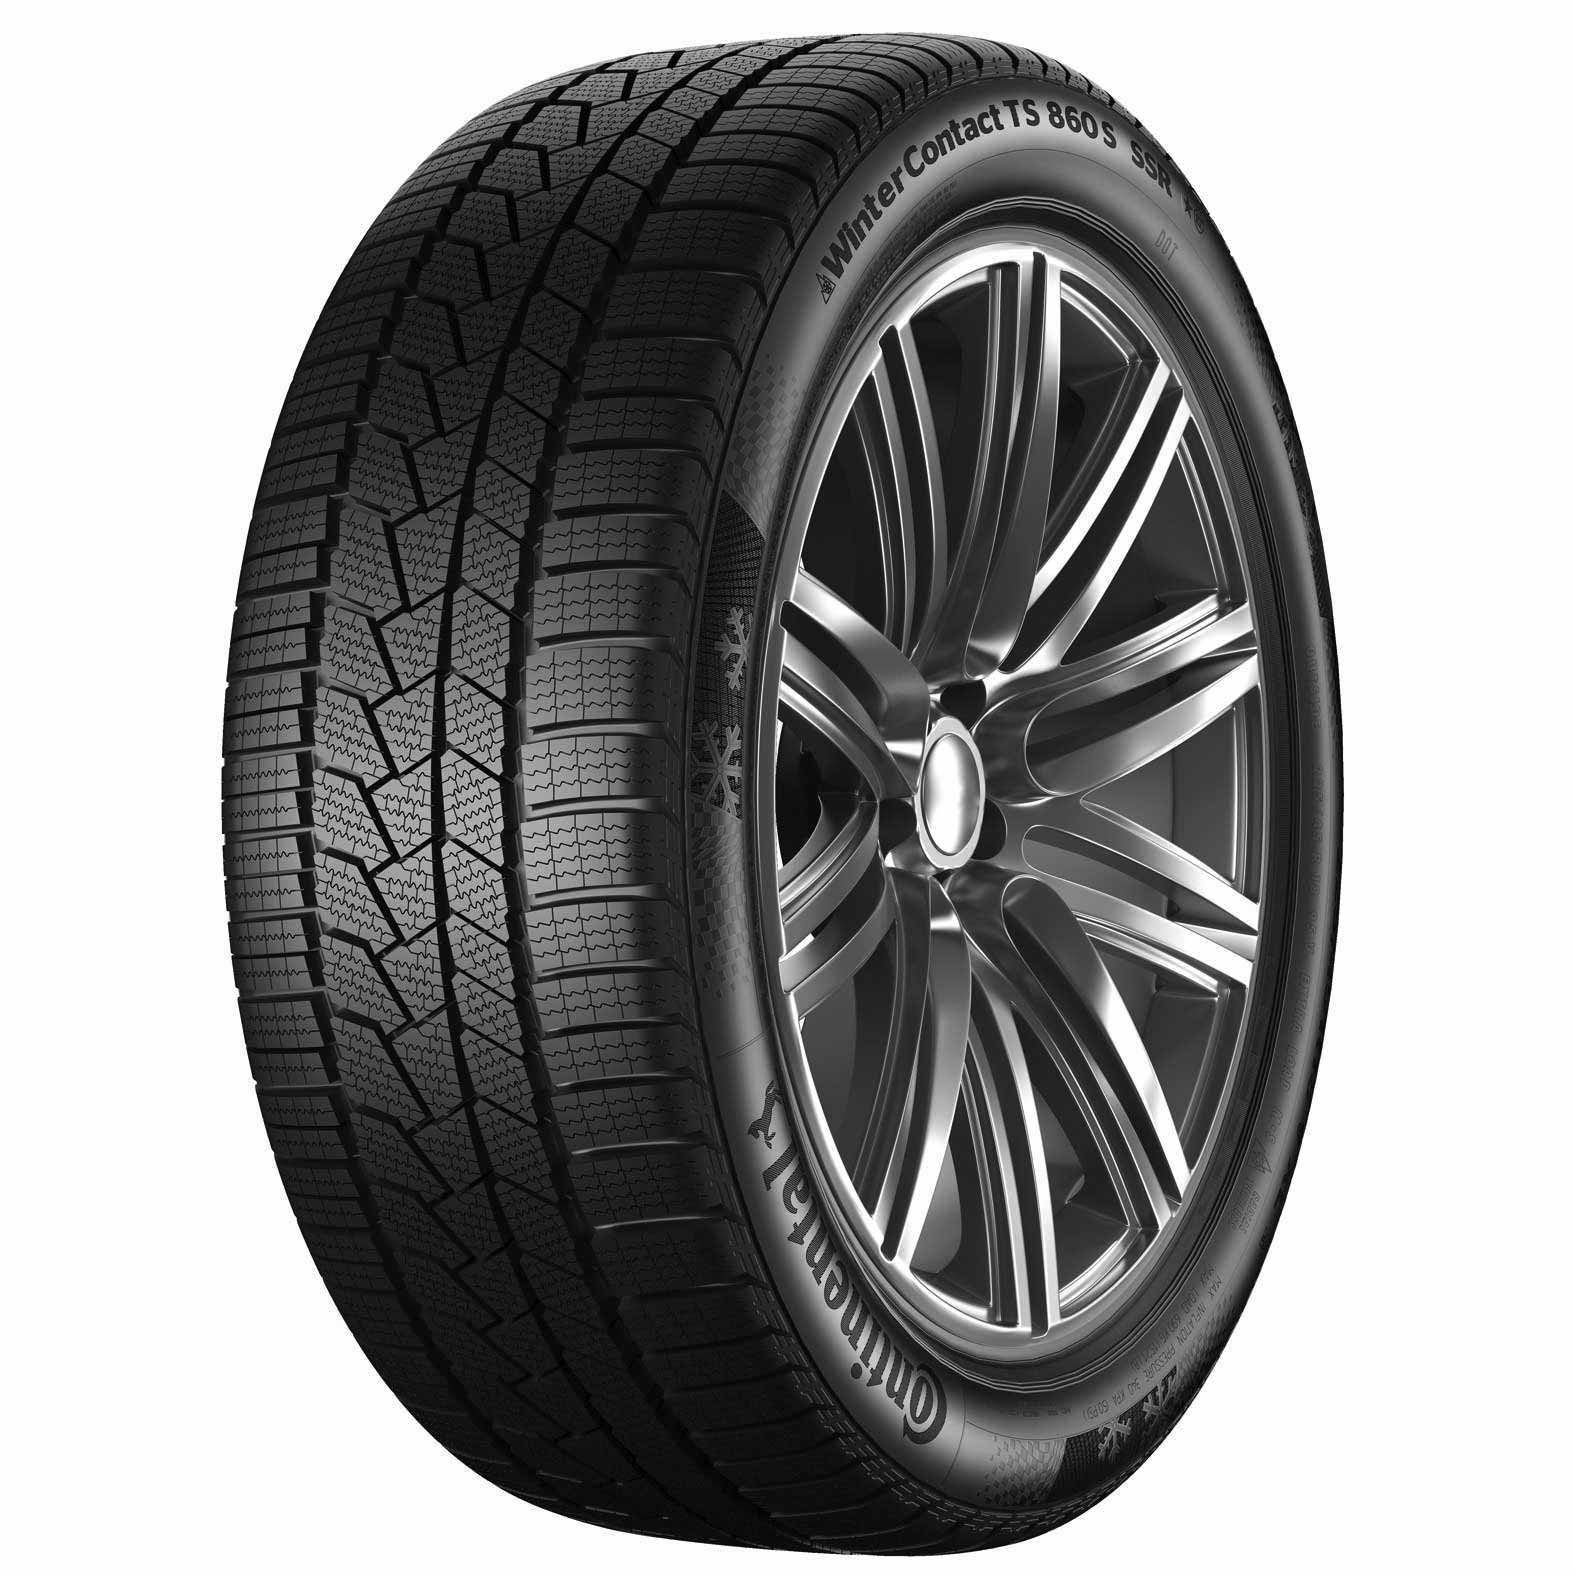 Tire WinterContact | Winter Kal Tires Continental S TS860 for